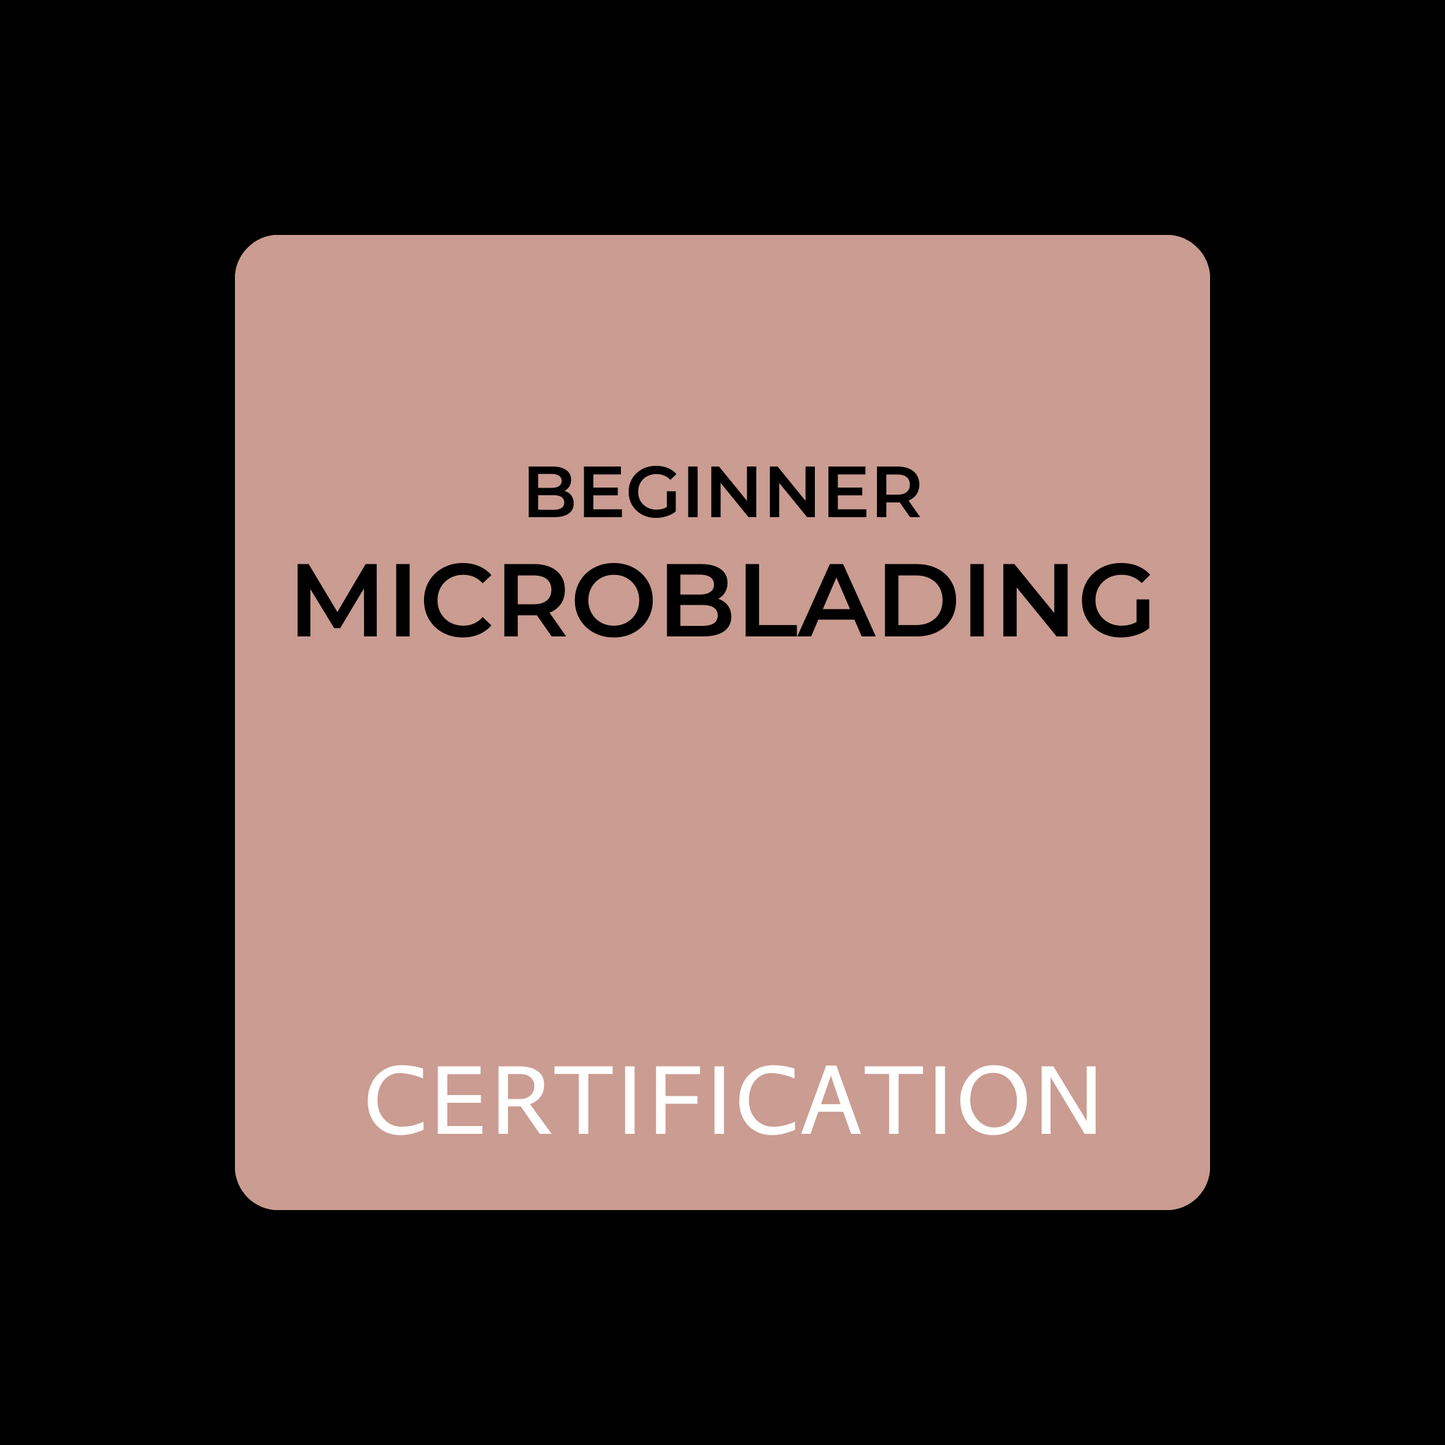 LEARN MICROBLADING